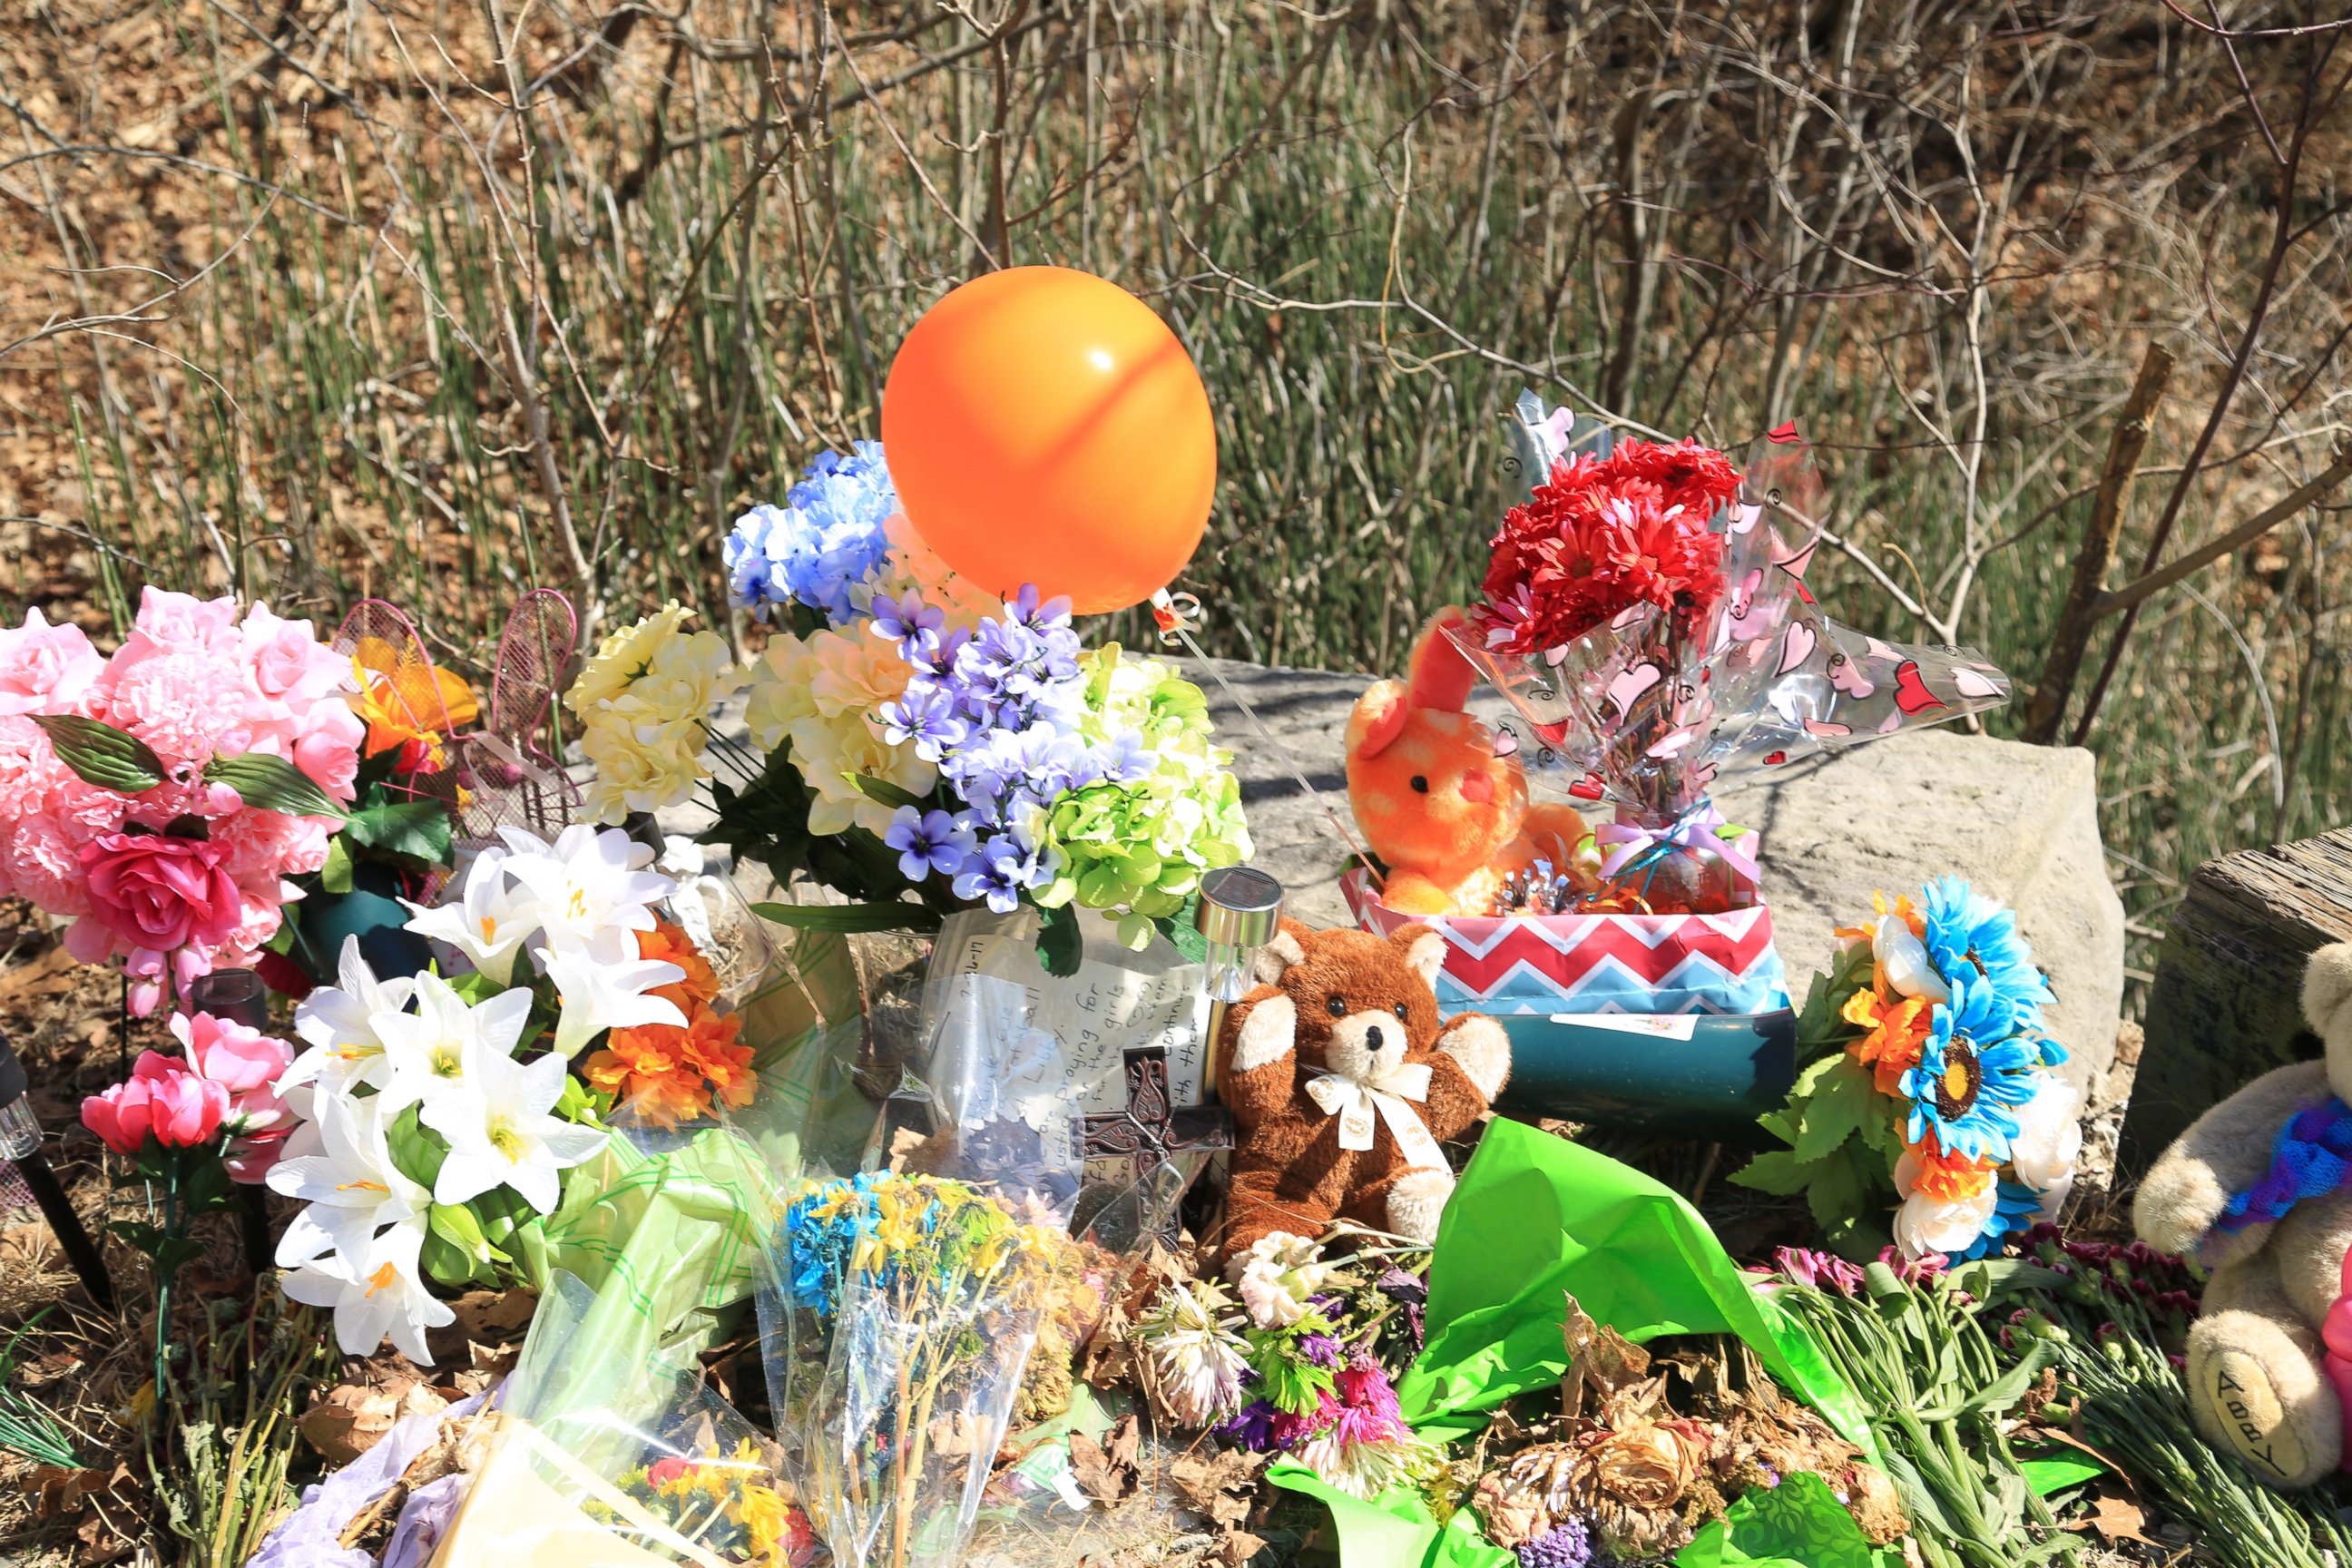 PHOTO: A makeshift memorial for Abby Williams and Libby German, who disappeared Feb. 14, 2017 along a hiking trail in Delphi, Indiana, and were later found dead. 